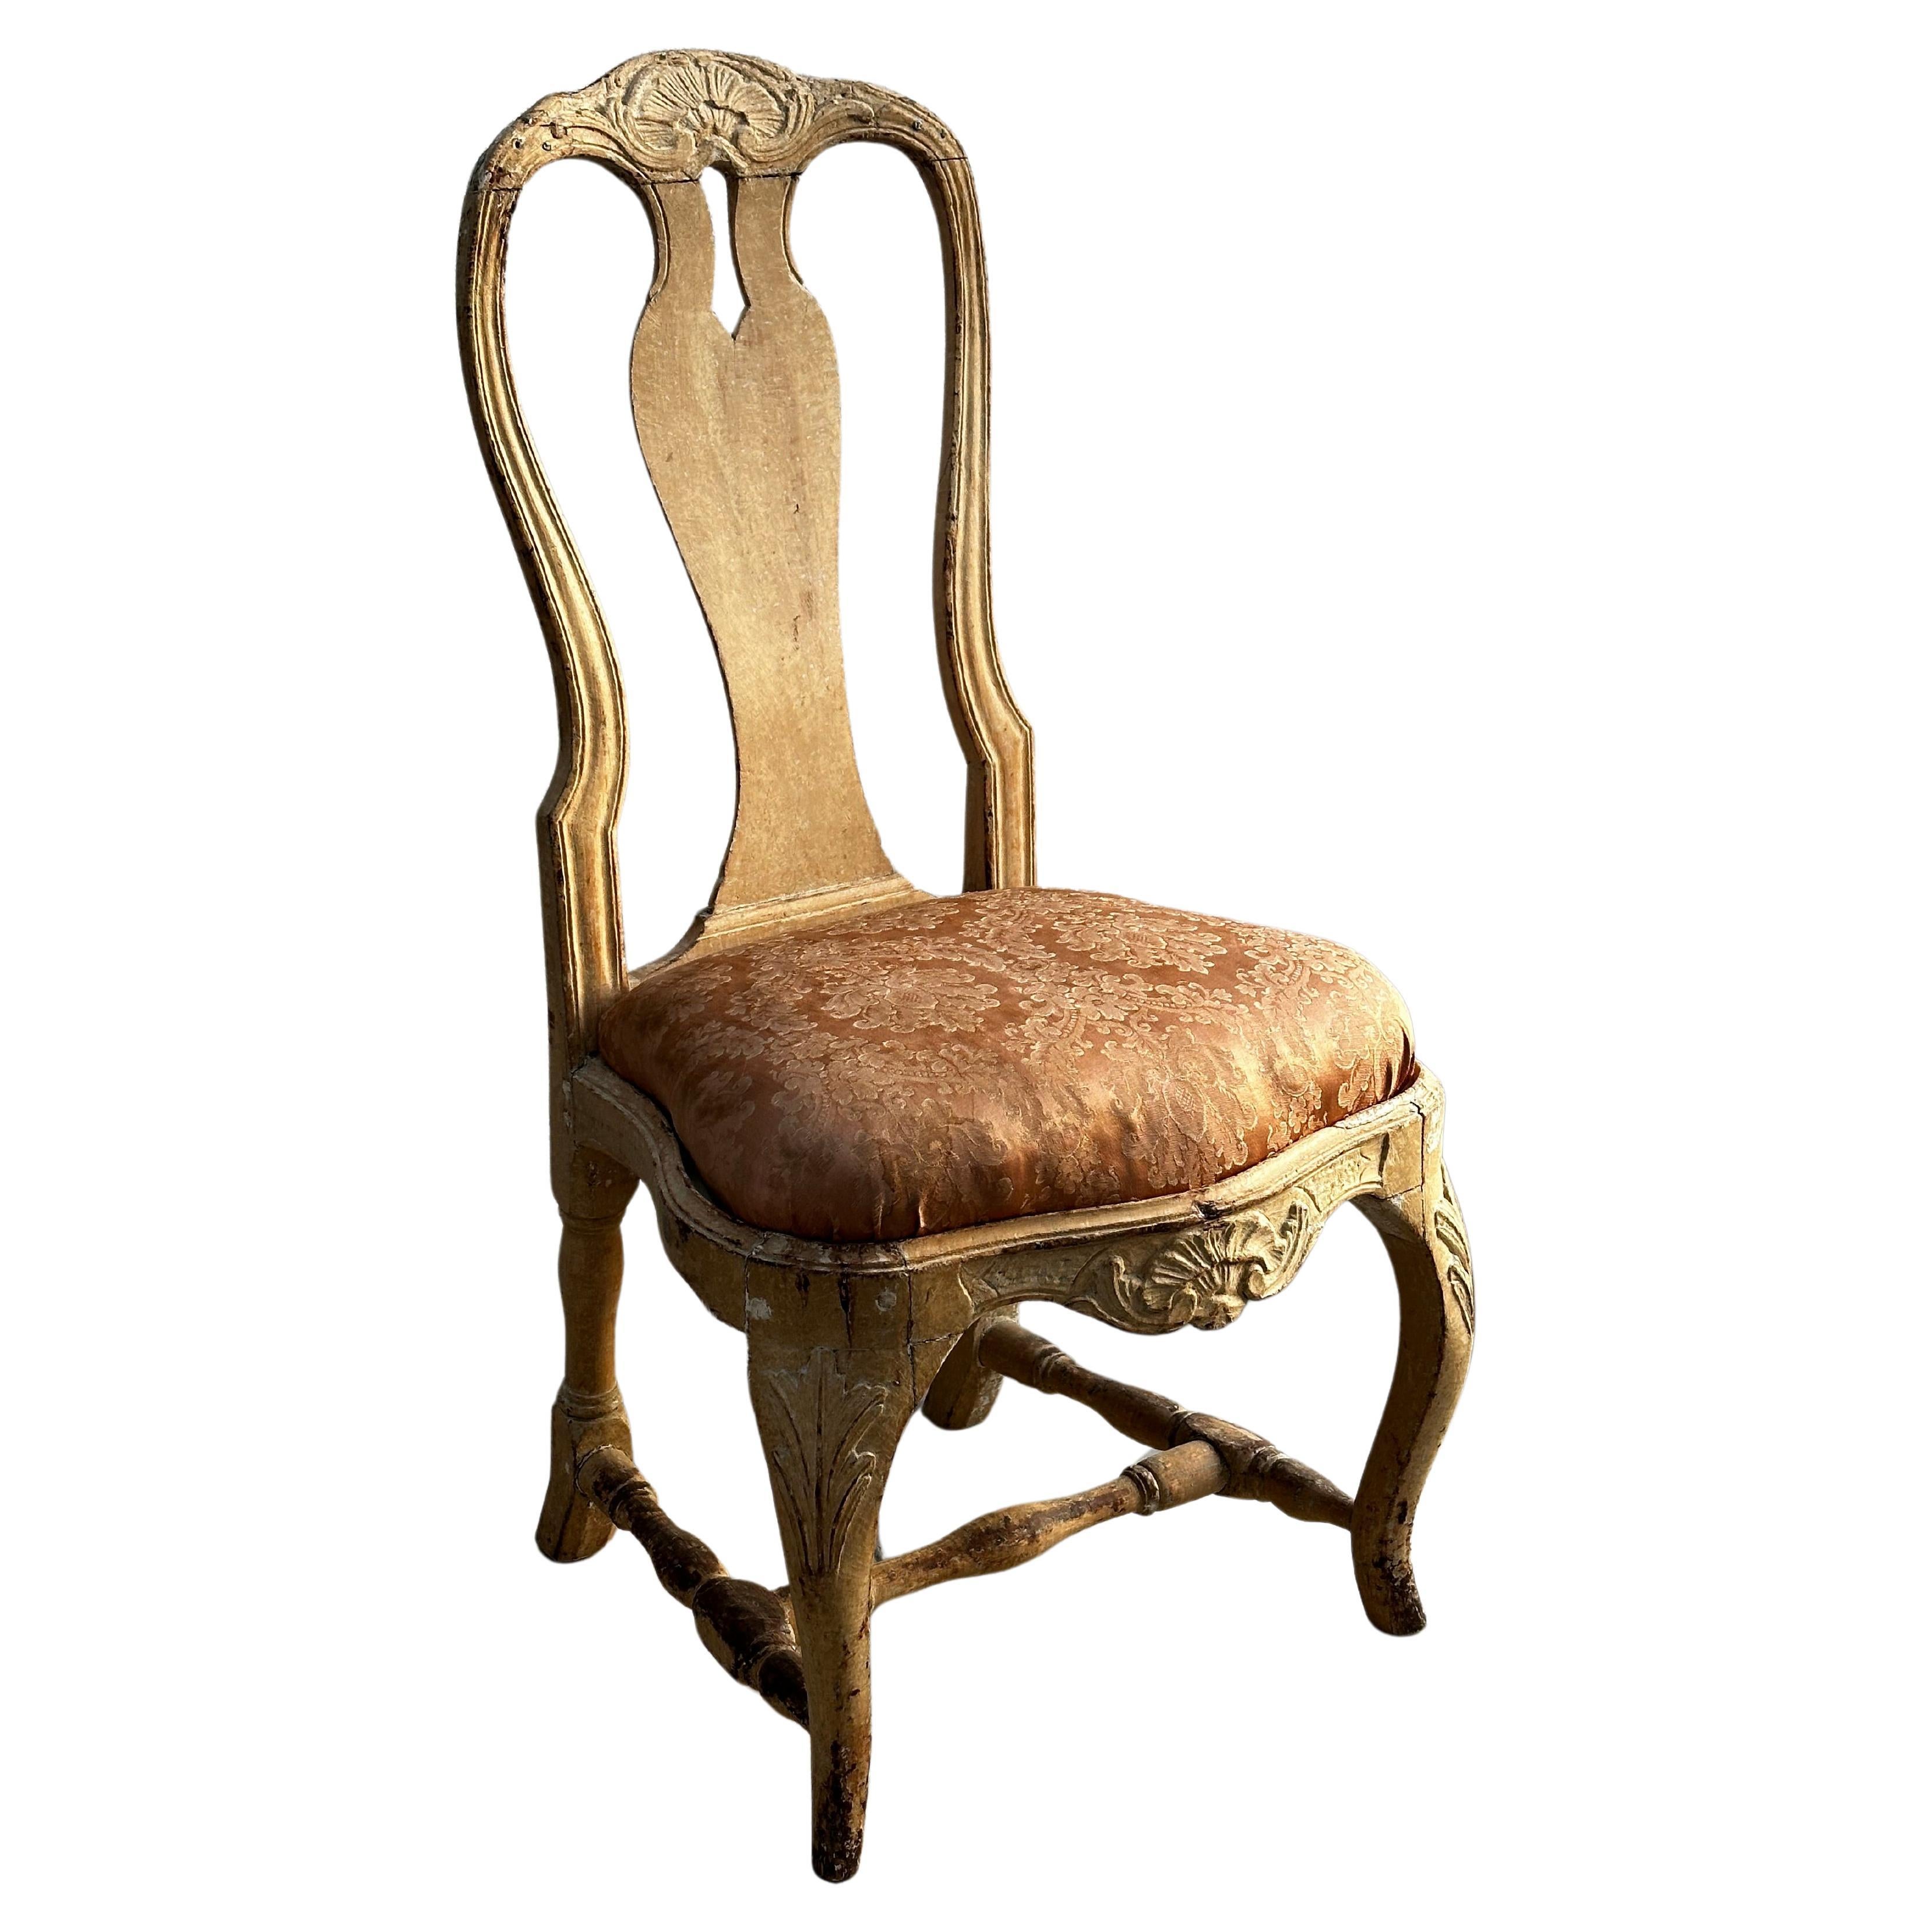 18th Century Rococo chair, with original color For Sale